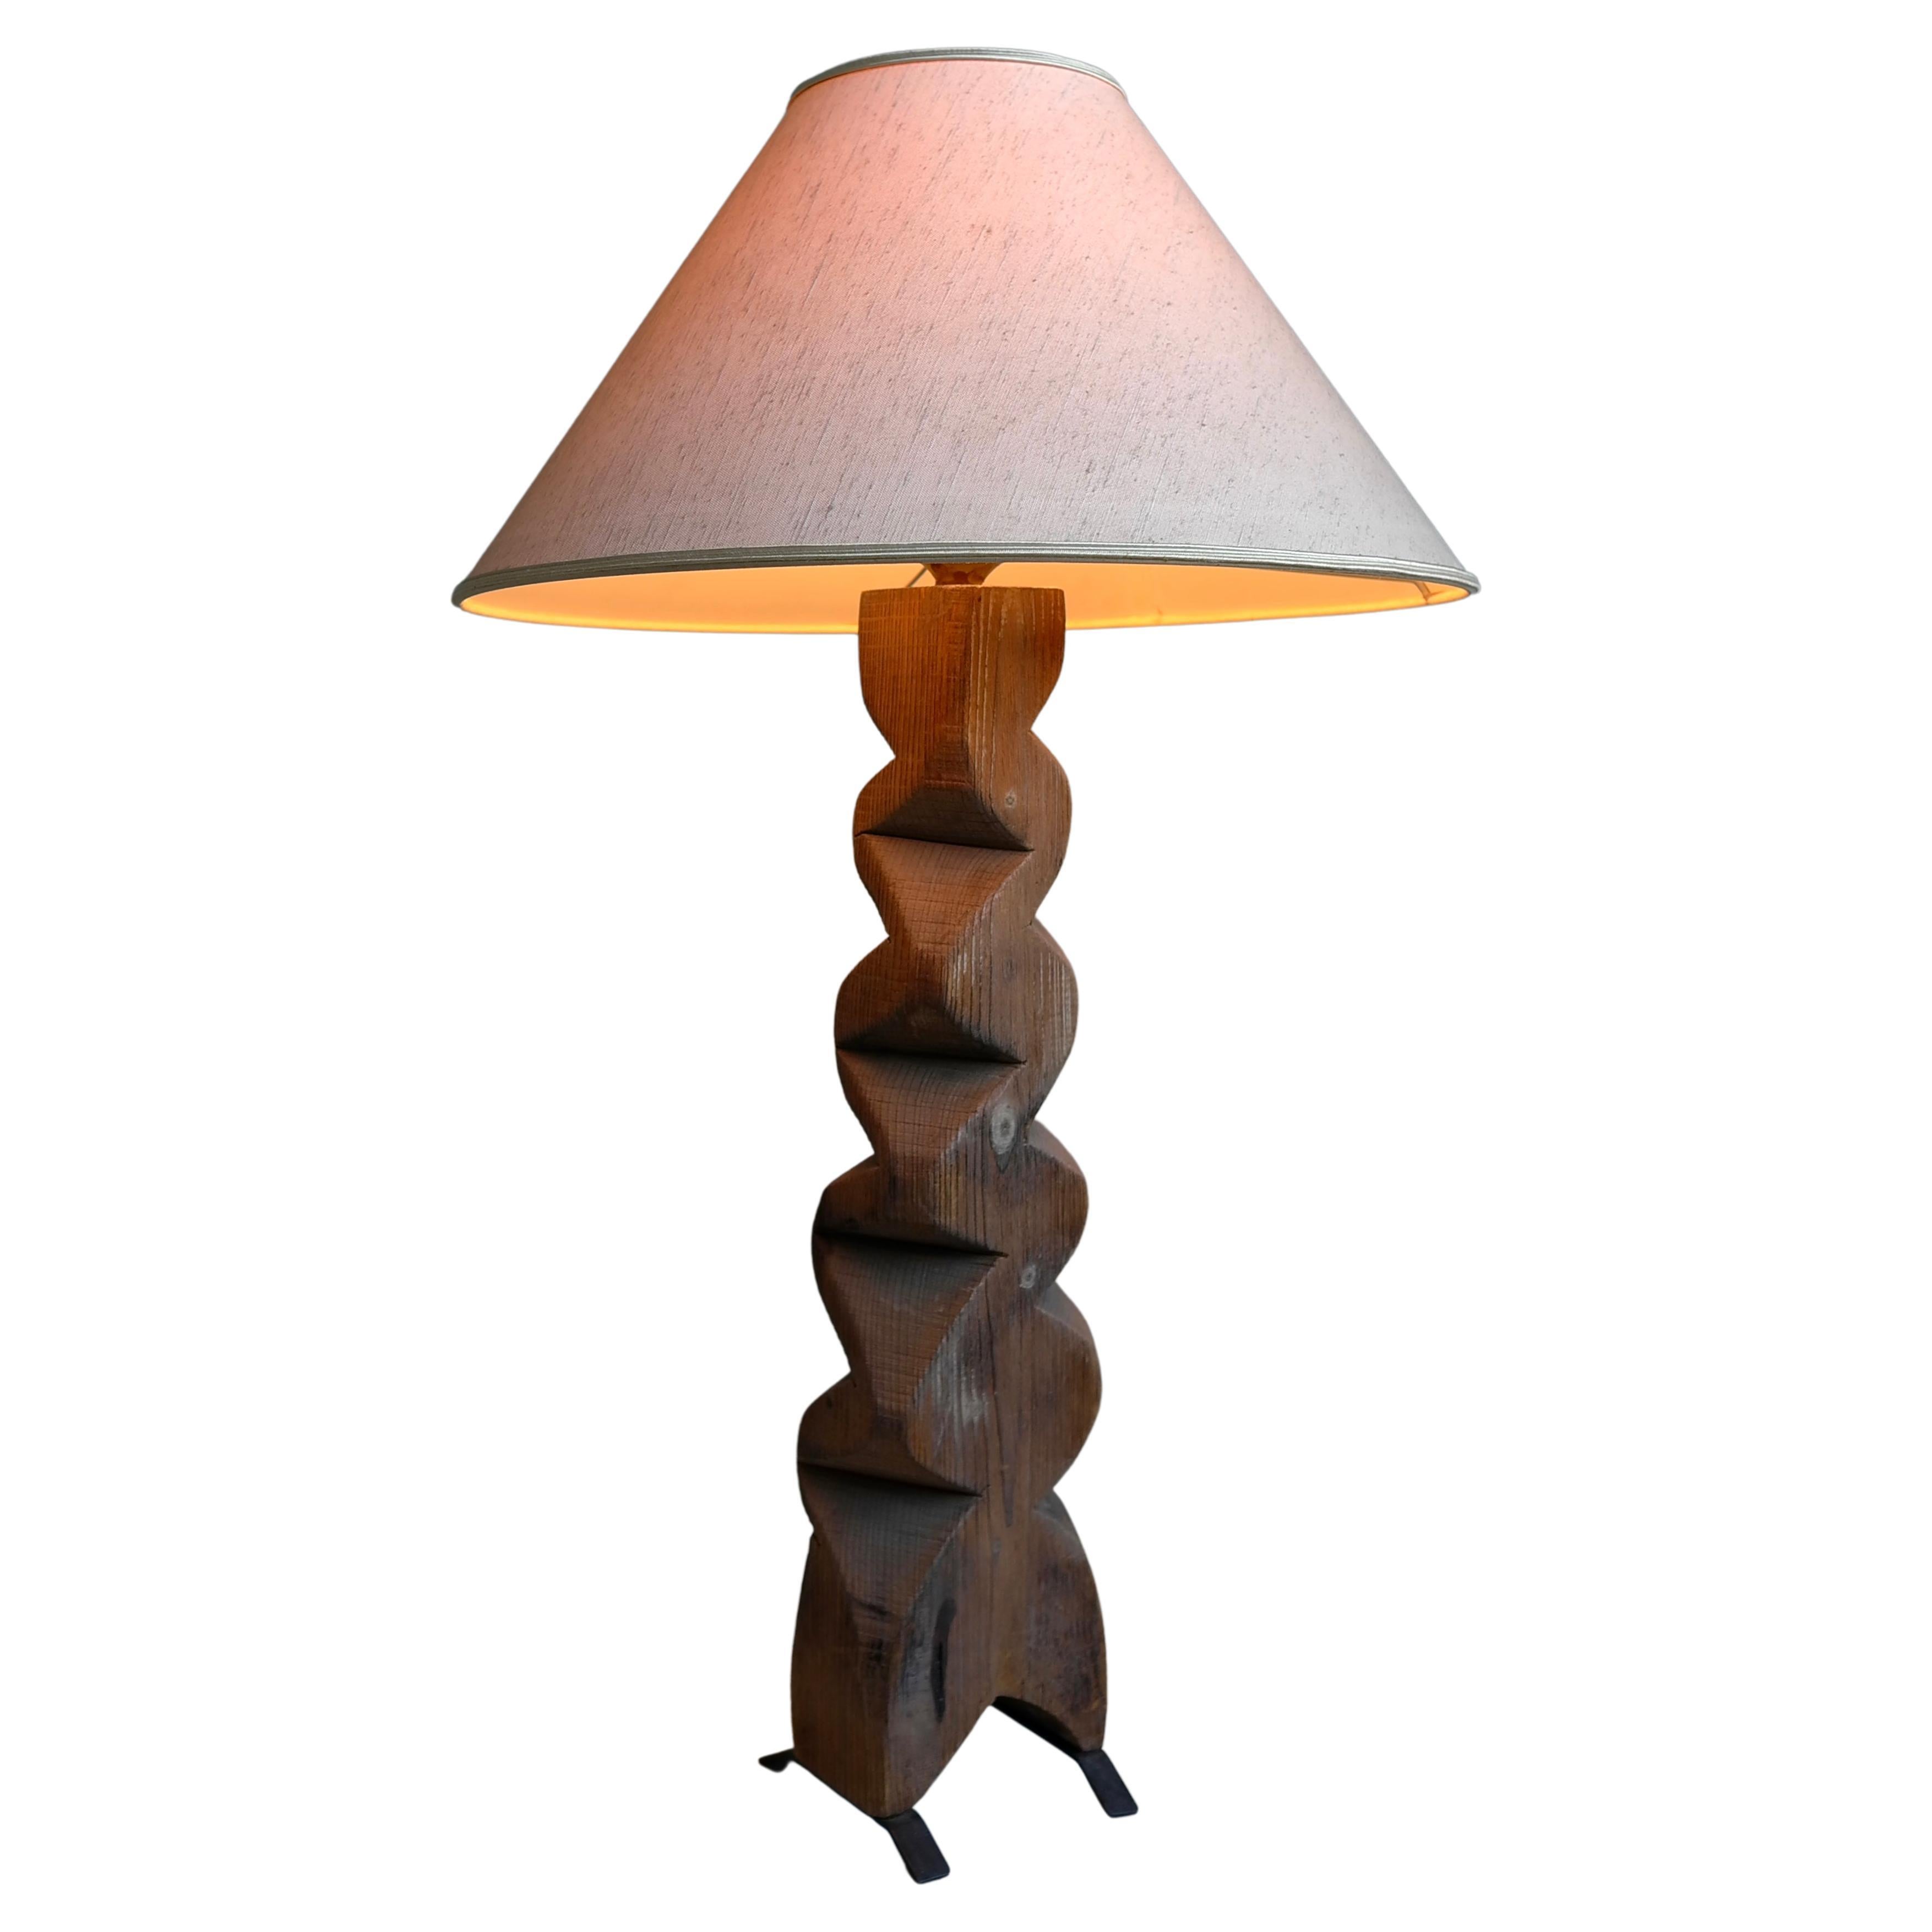 Large Mid-Century Modern Wooden Sculpture Table Lamp, off White Silk Shade, 1965